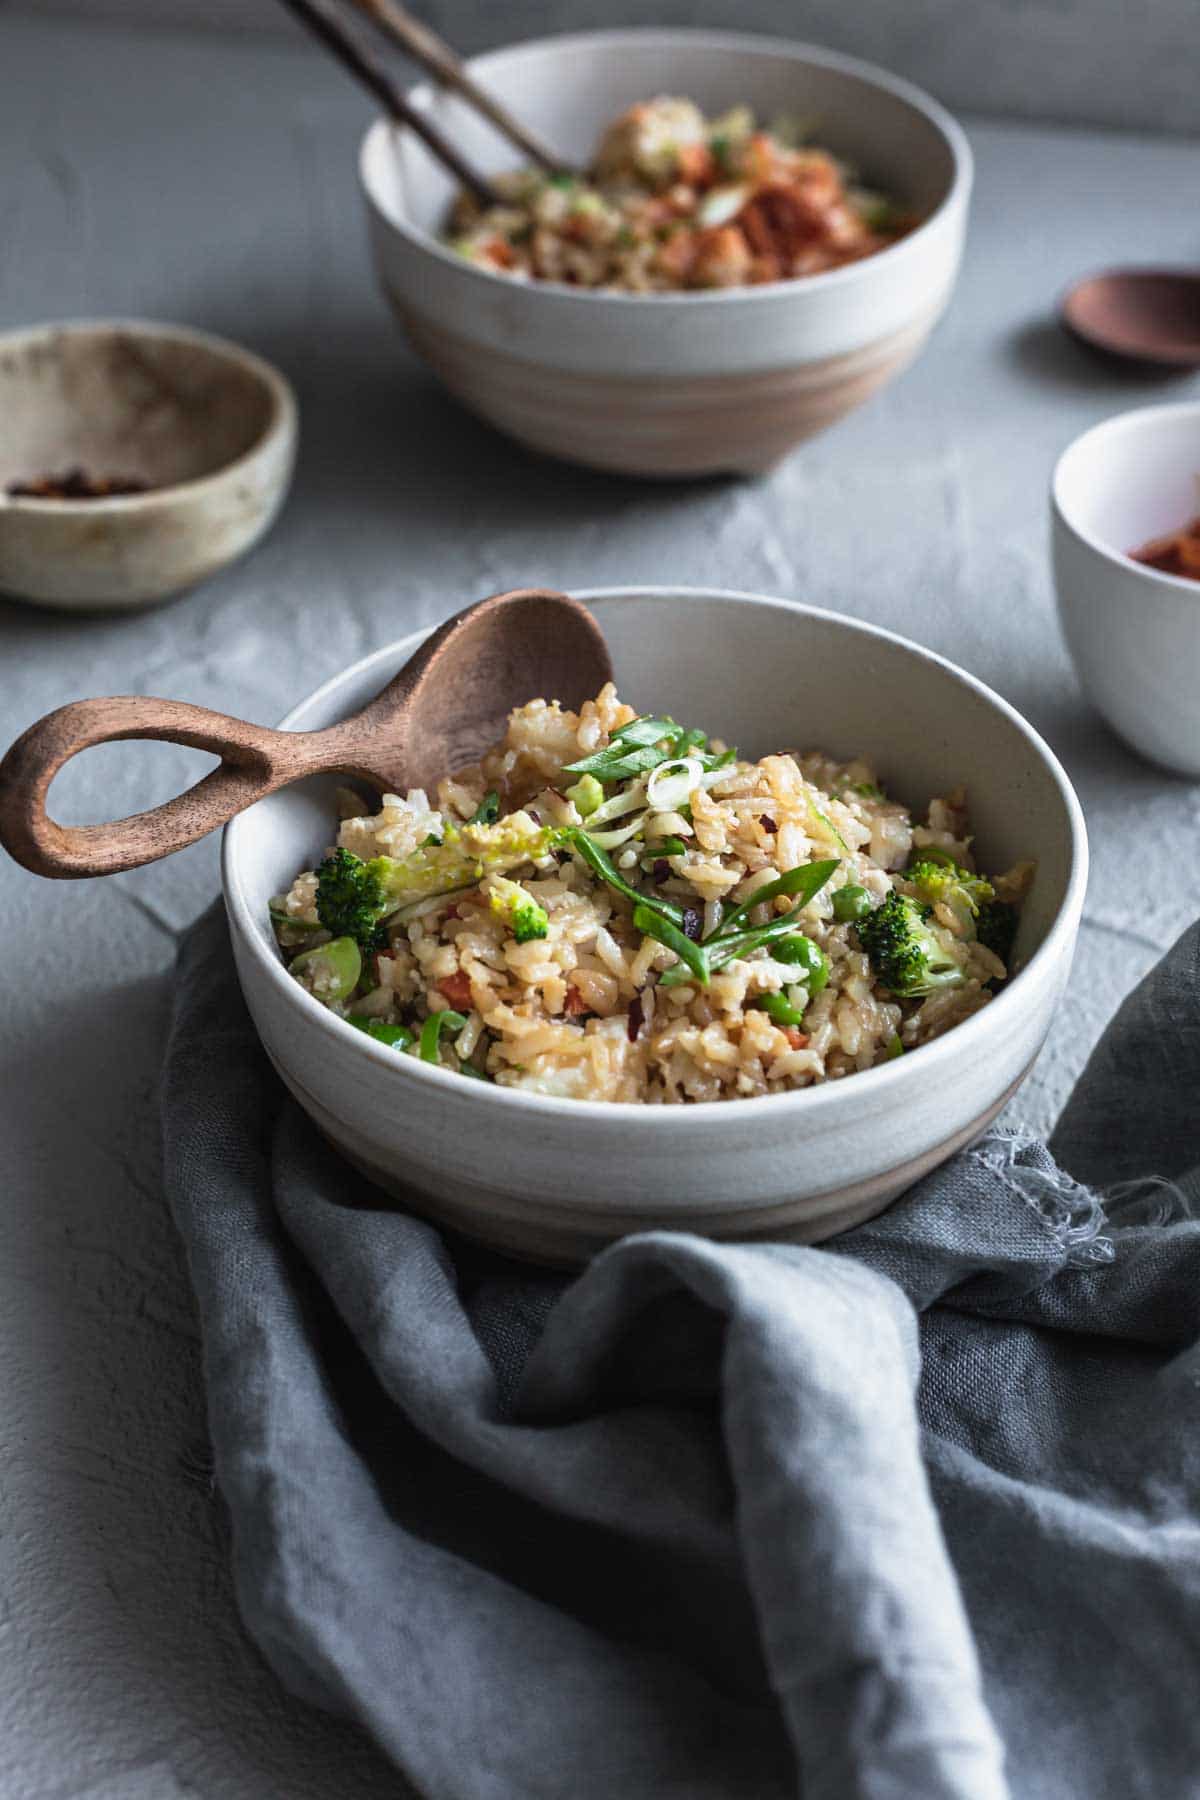 vegan fried rice in a bowl with broccoli and other veggies